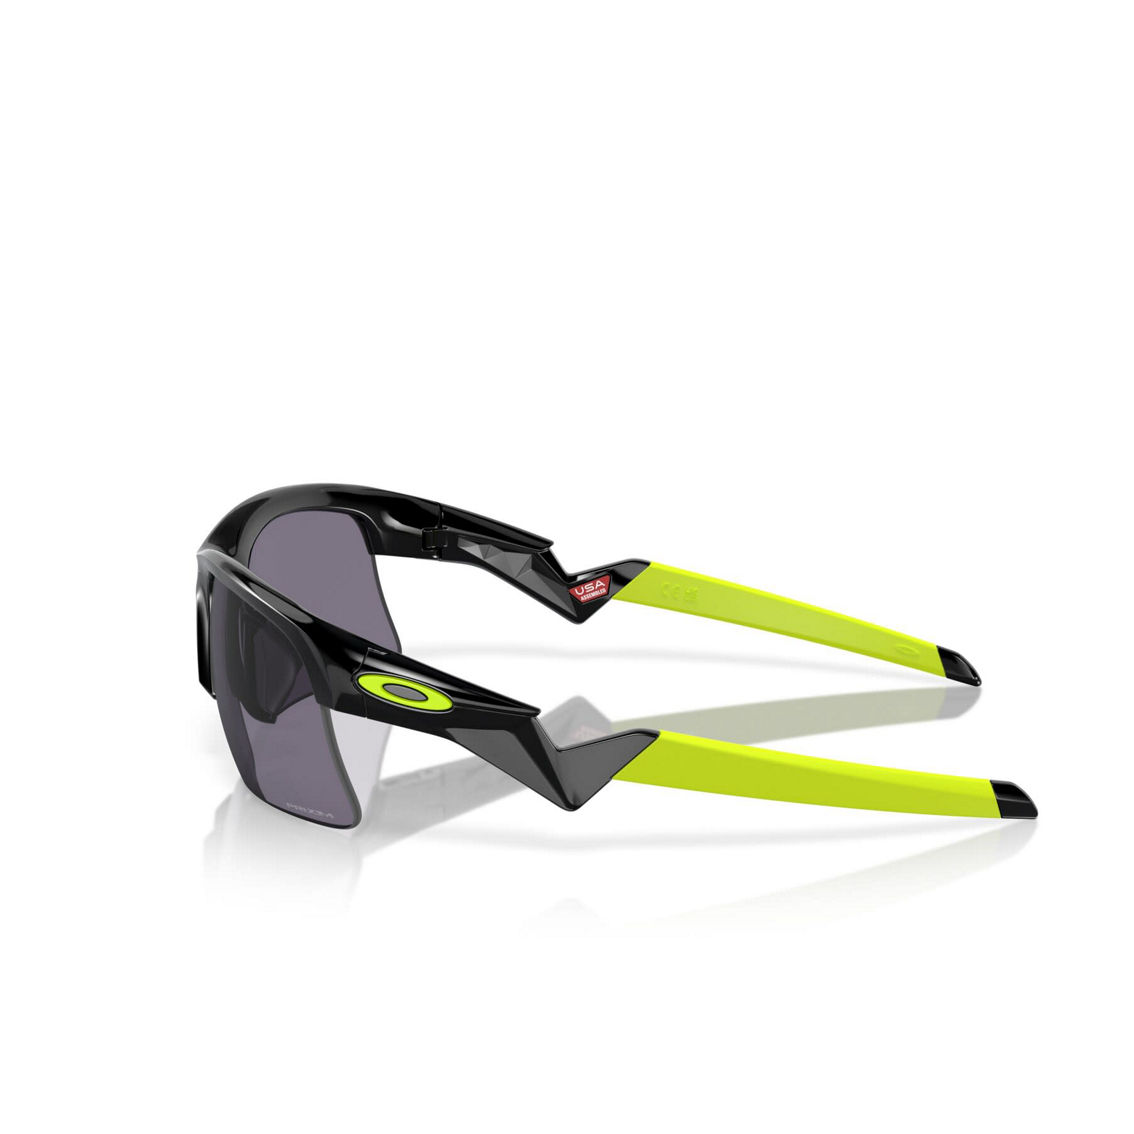 Oakley OJ9013 Capacitor (Youth Fit) - Image 3 of 5